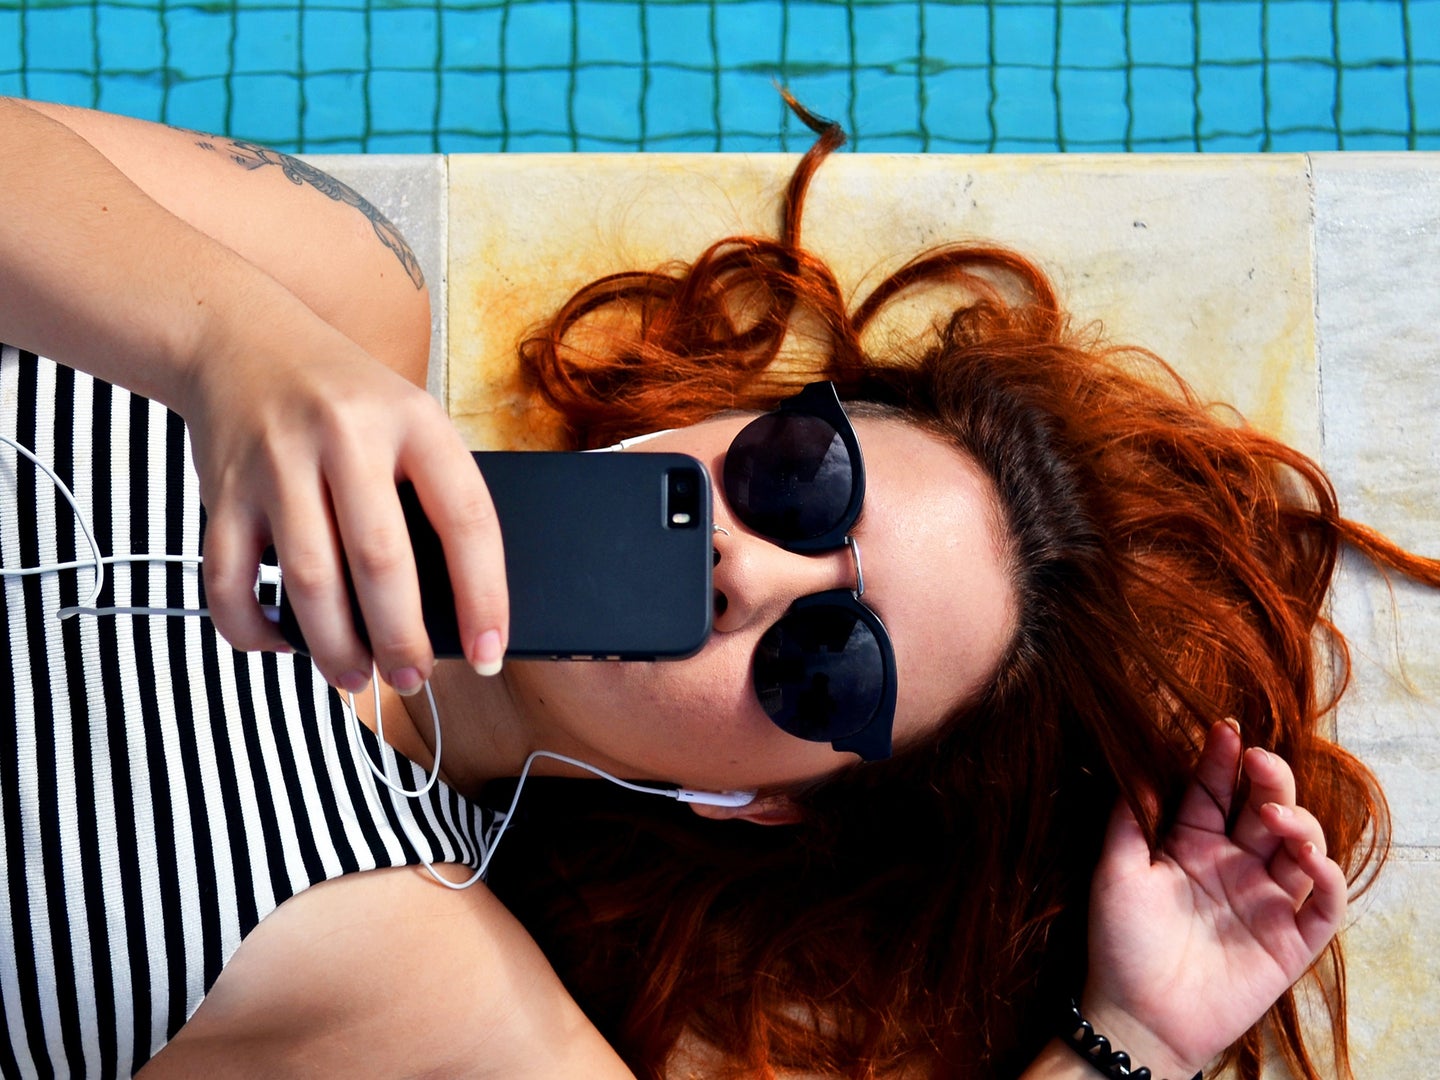 A woman with red hair wearing sunglasses and a black-and-white-striped shirt, laying on the concrete edge of a tiled swimming pool, looking at her phone, which she's holding above her face.